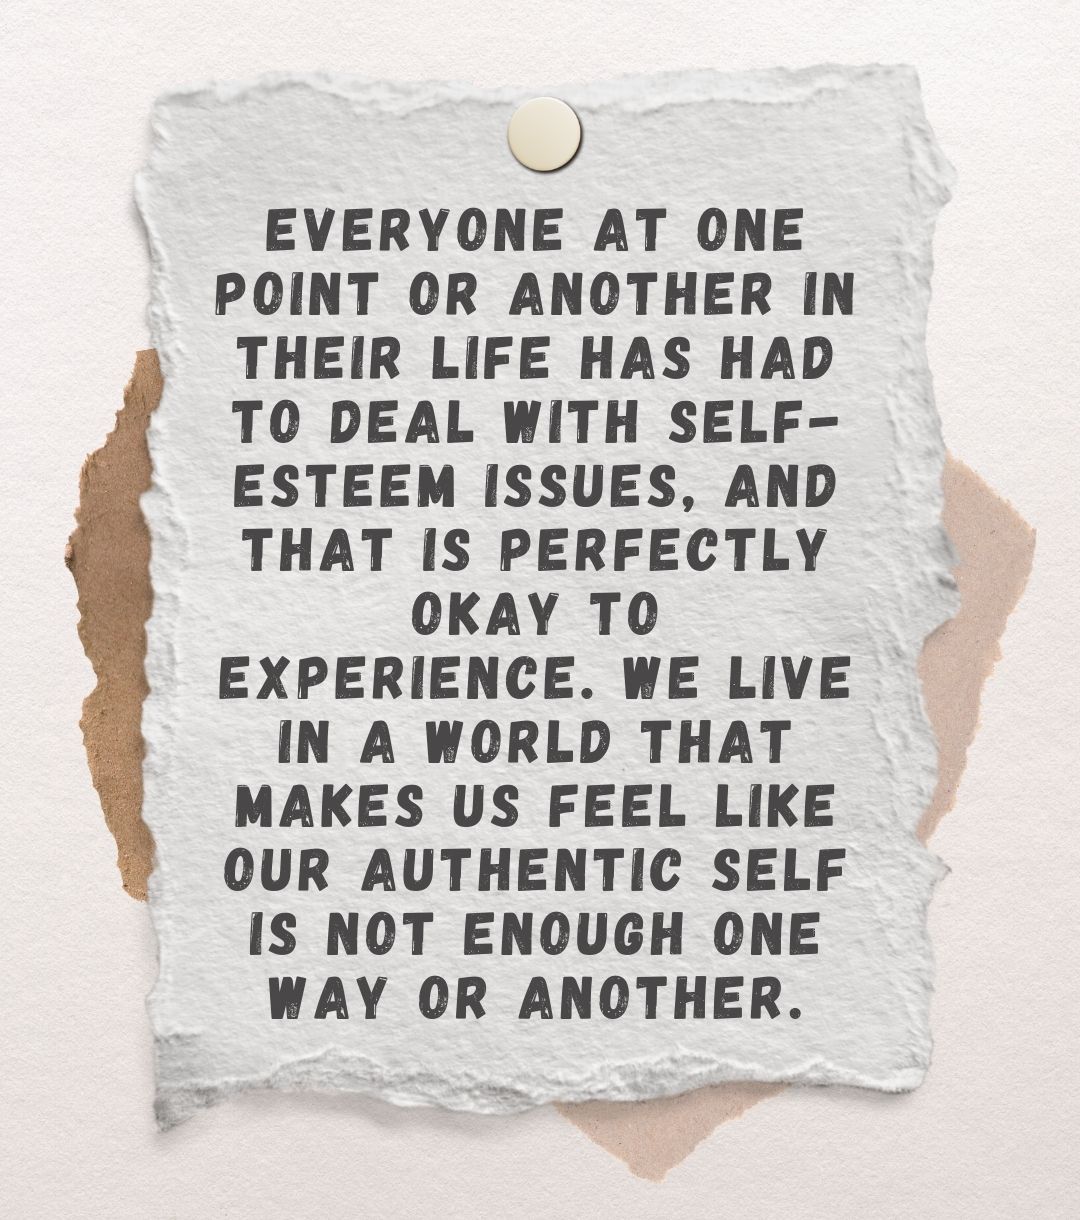 Everyone at one point or another in their life has had to deal with self-esteem issues, and that is perfectly okay to experience.